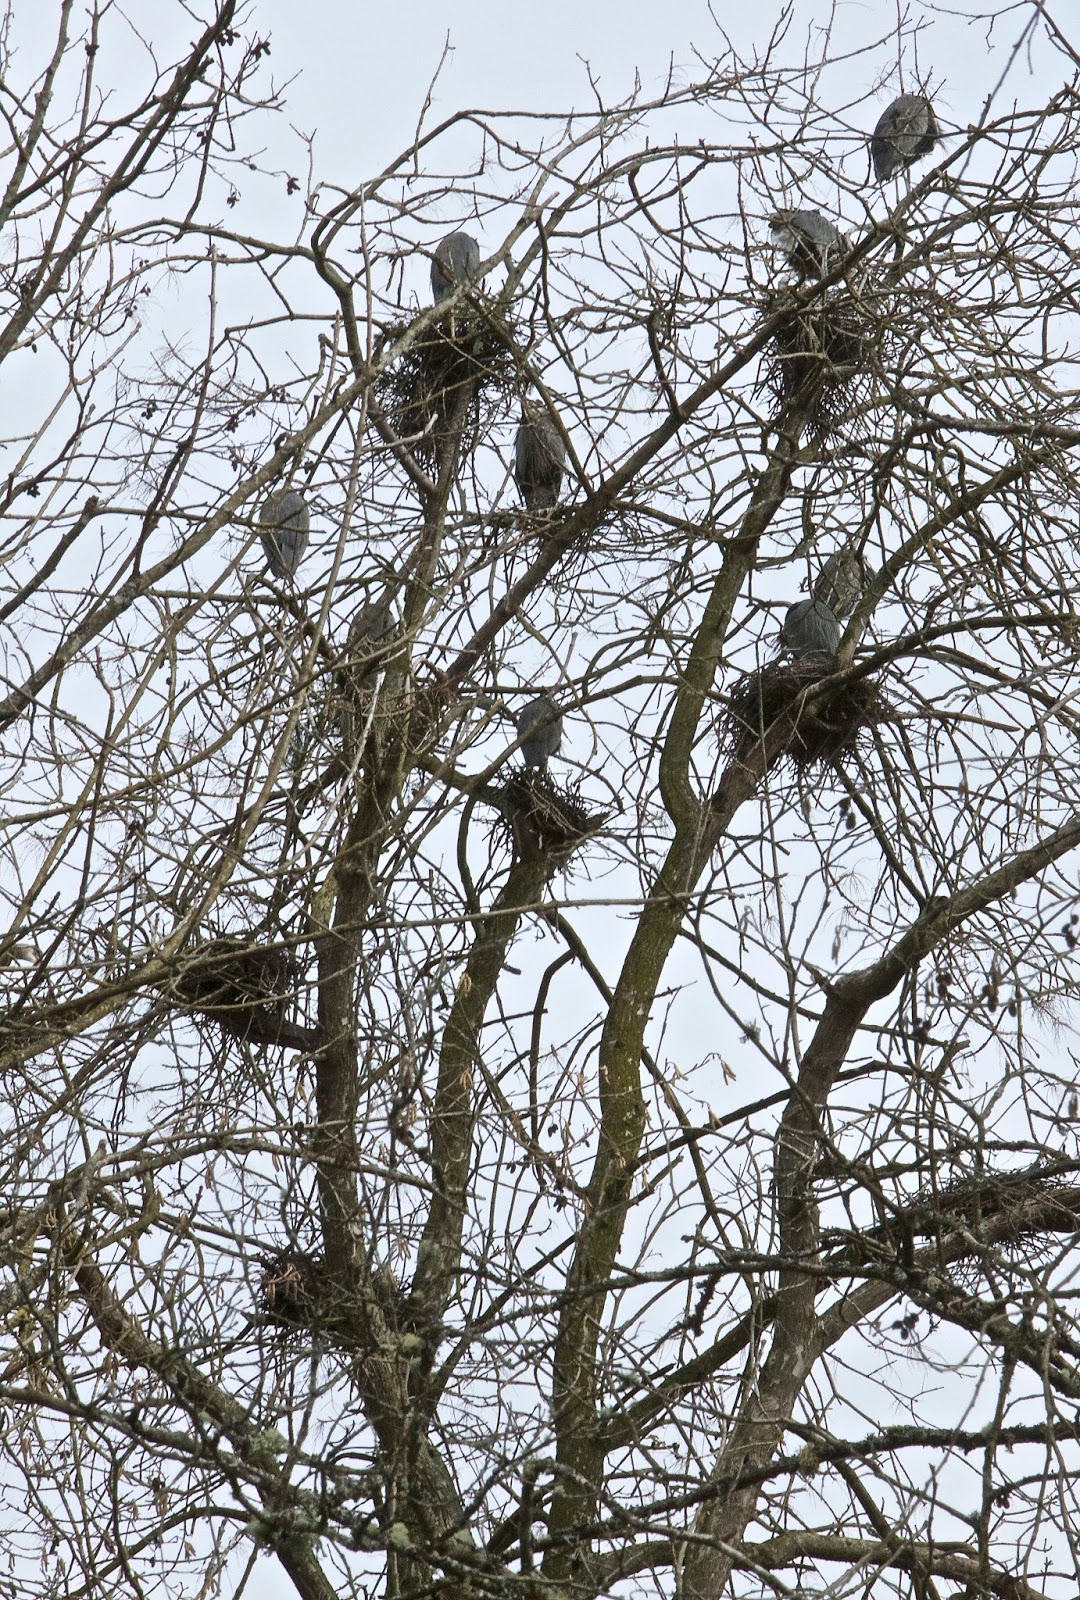 Shoreline Area News: Herons have returned to Kenmore rookery